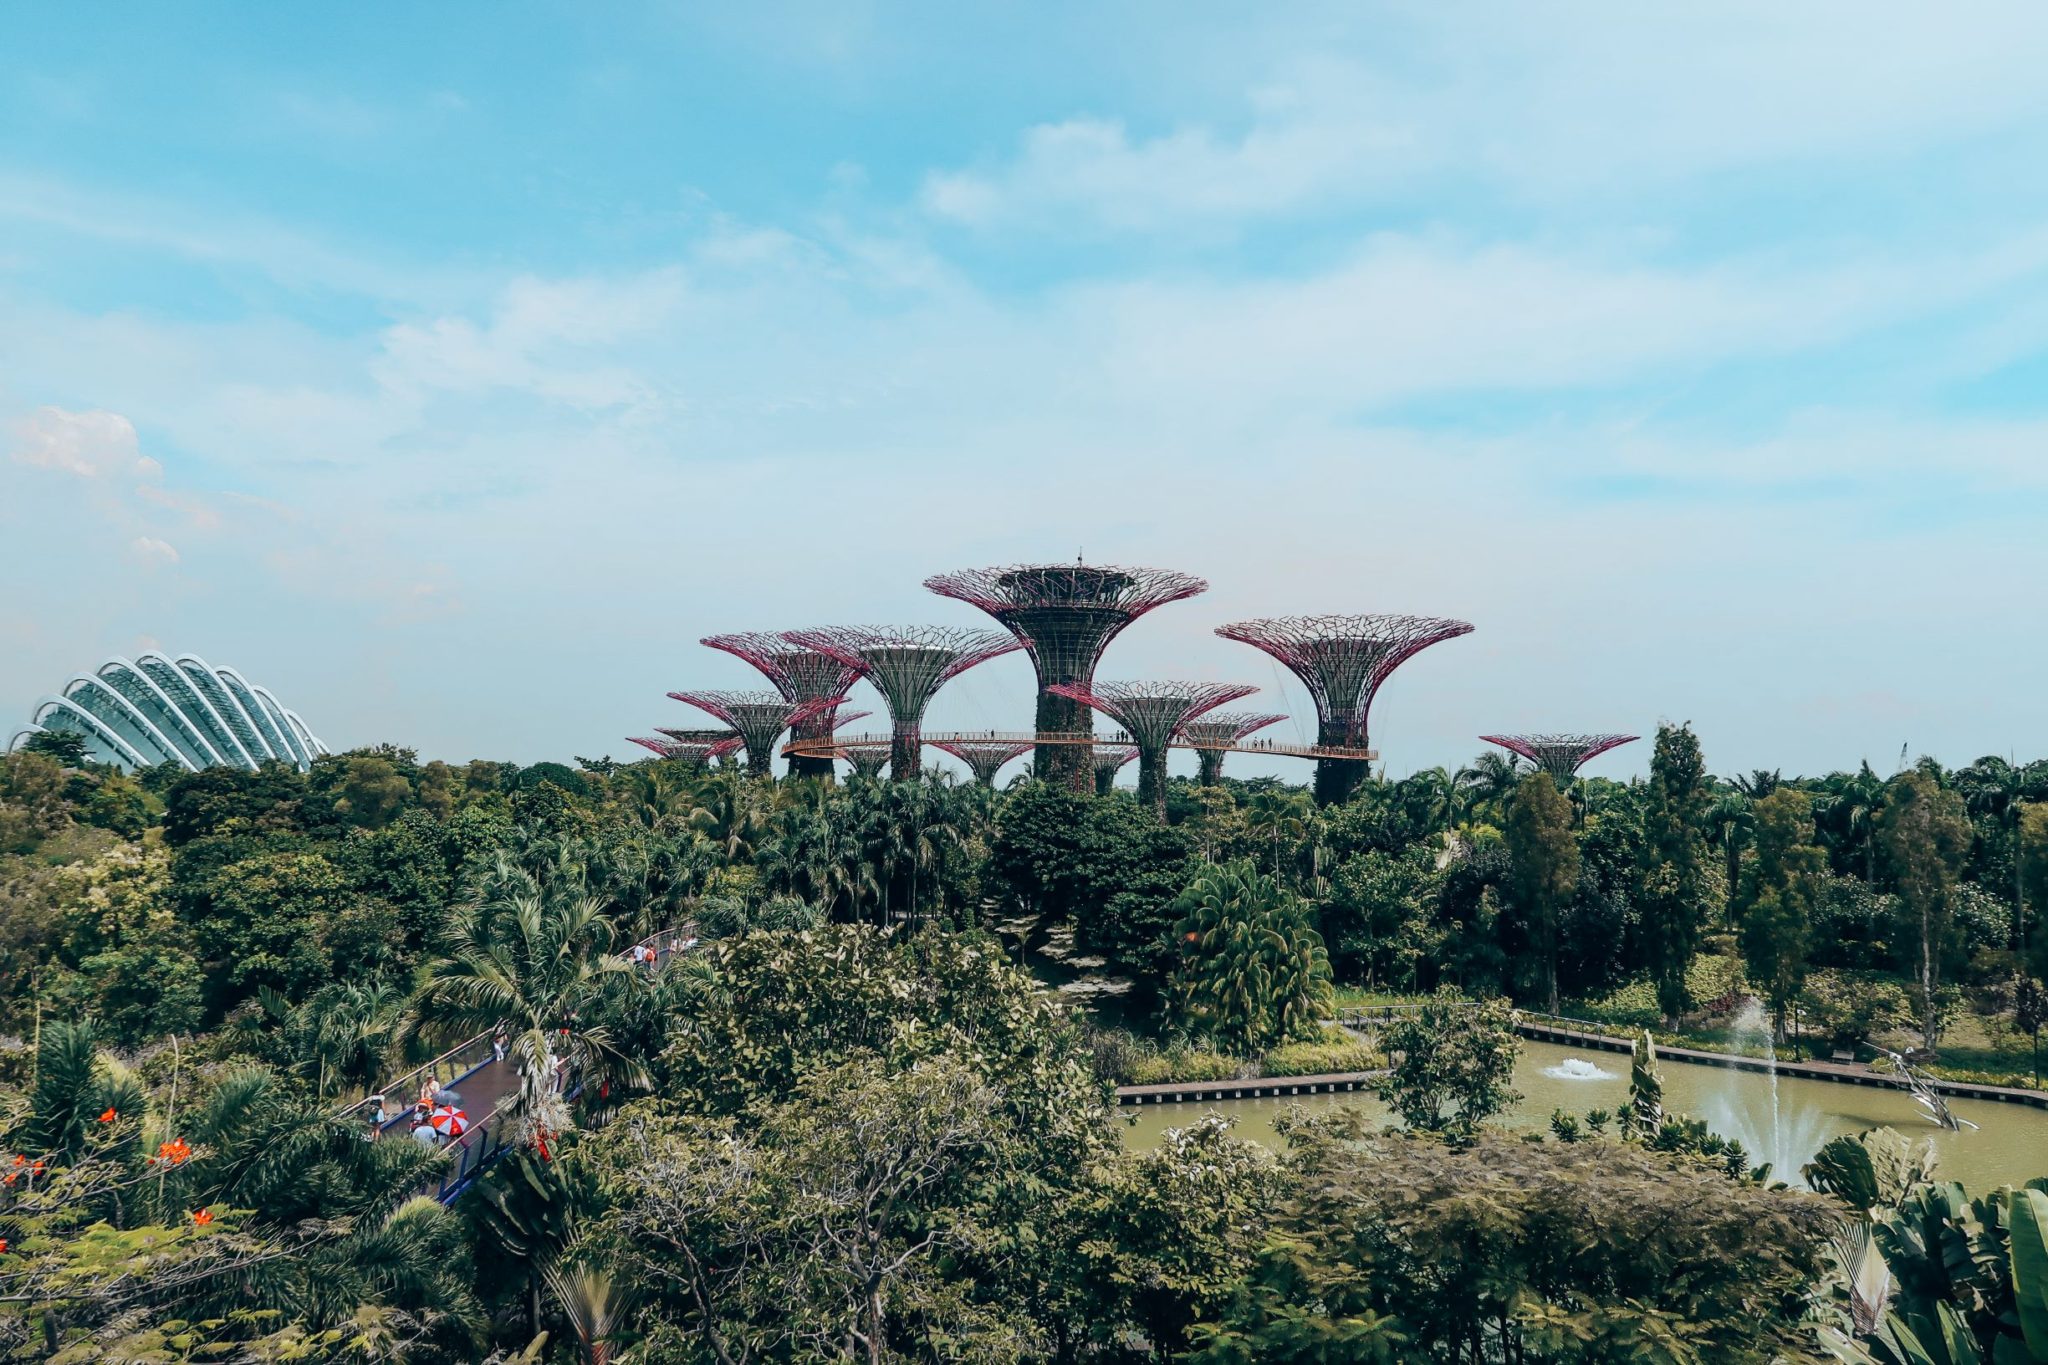 Visiting the Gardens by the Bay 